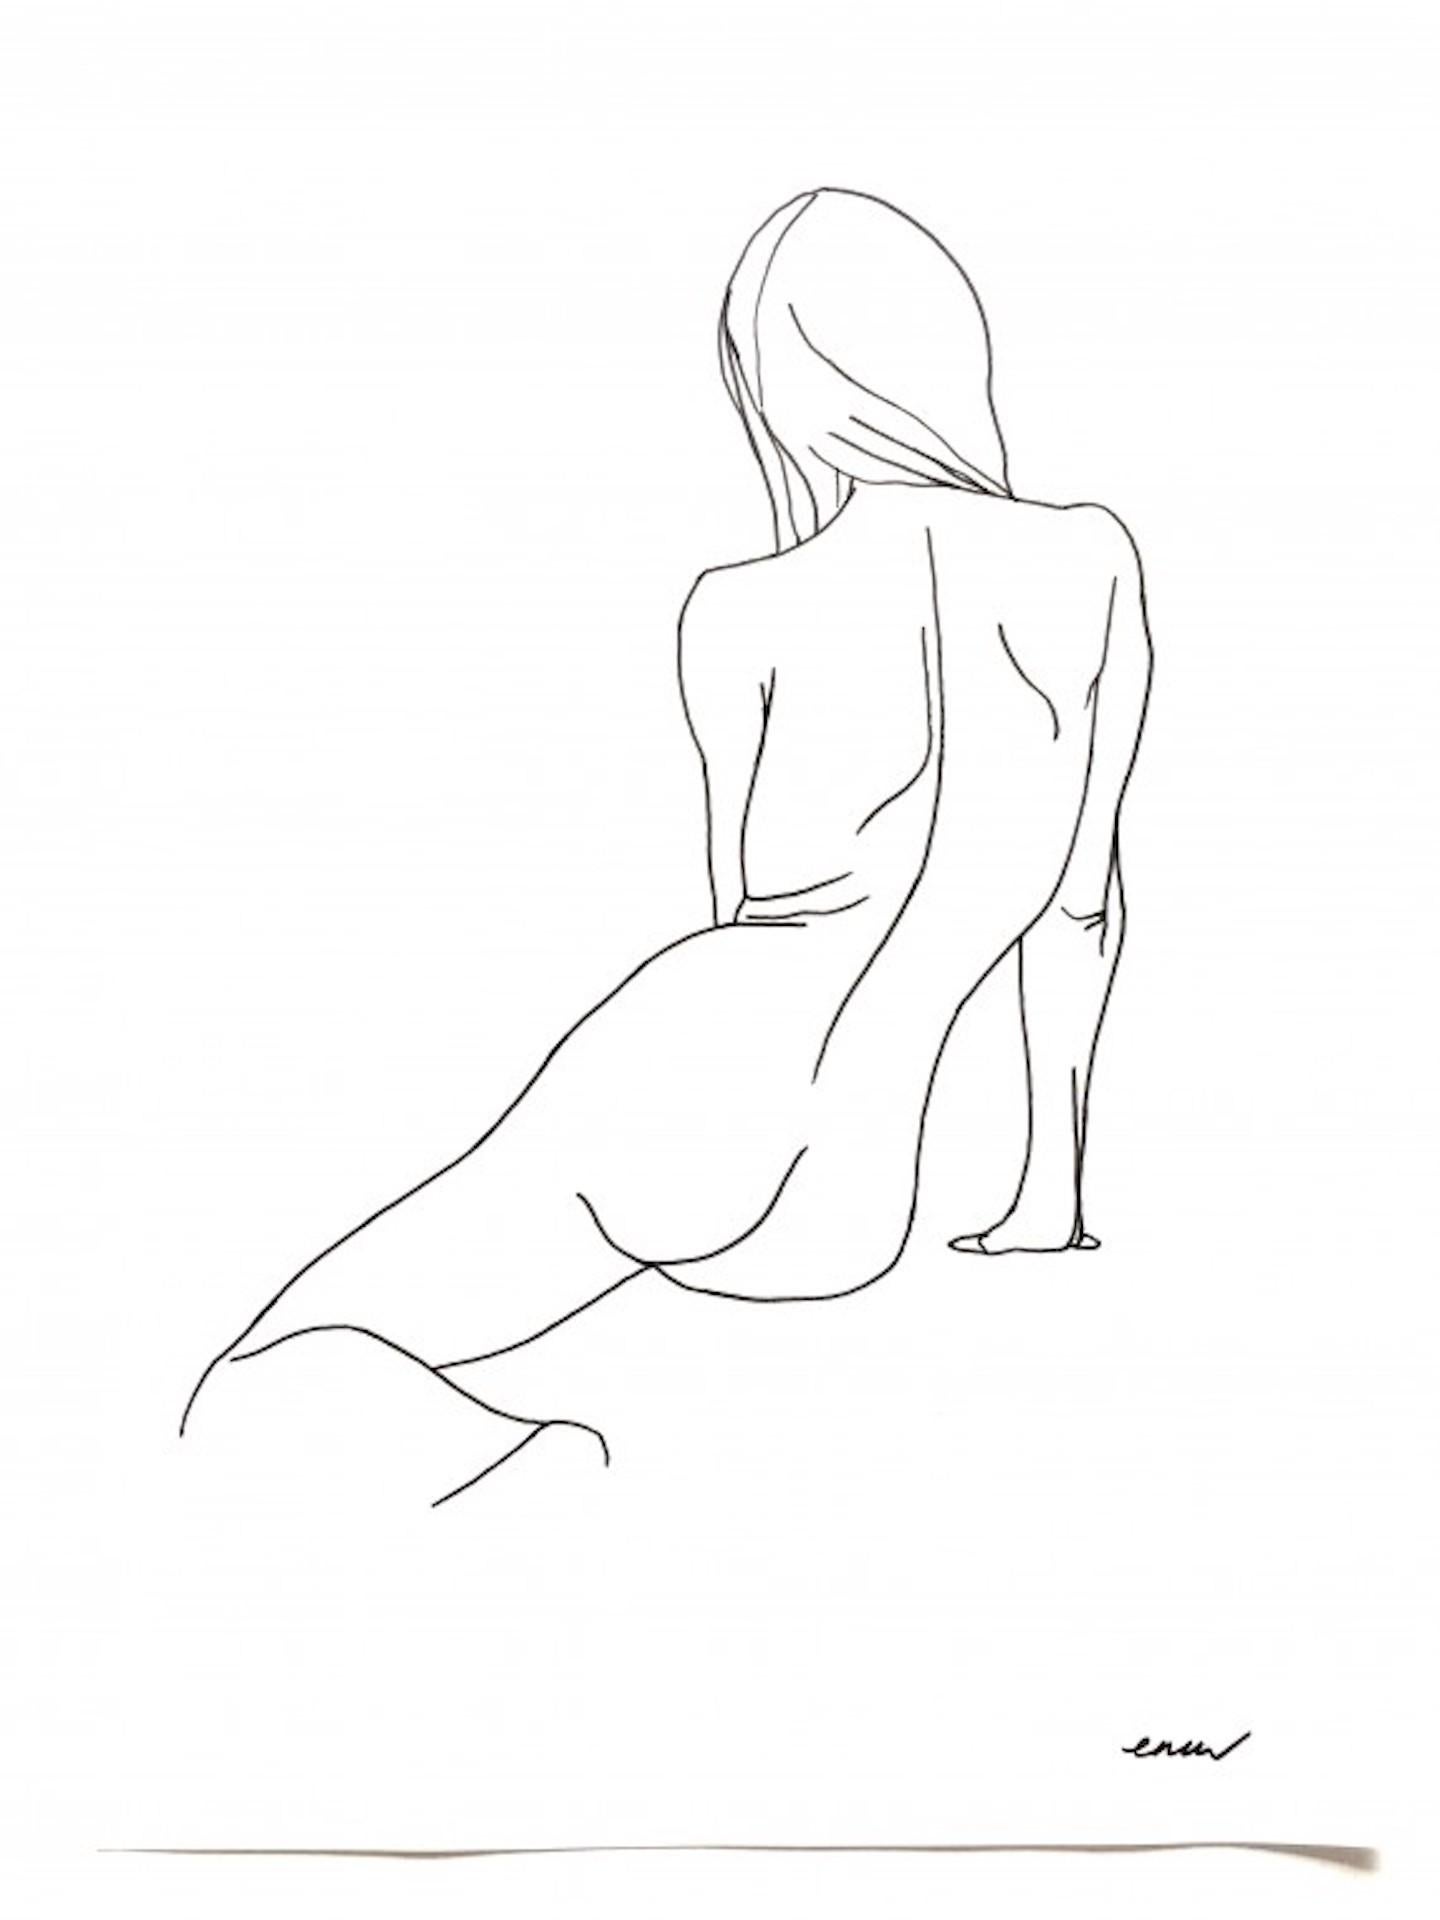 This original drawing by artist Ellen Williams is one in a series of elegant minimal nude studies, using a singular line to interpret the curves of a body.

Ellen Mae Williams, artist, is available for sale online and in our art gallery at Wychwood